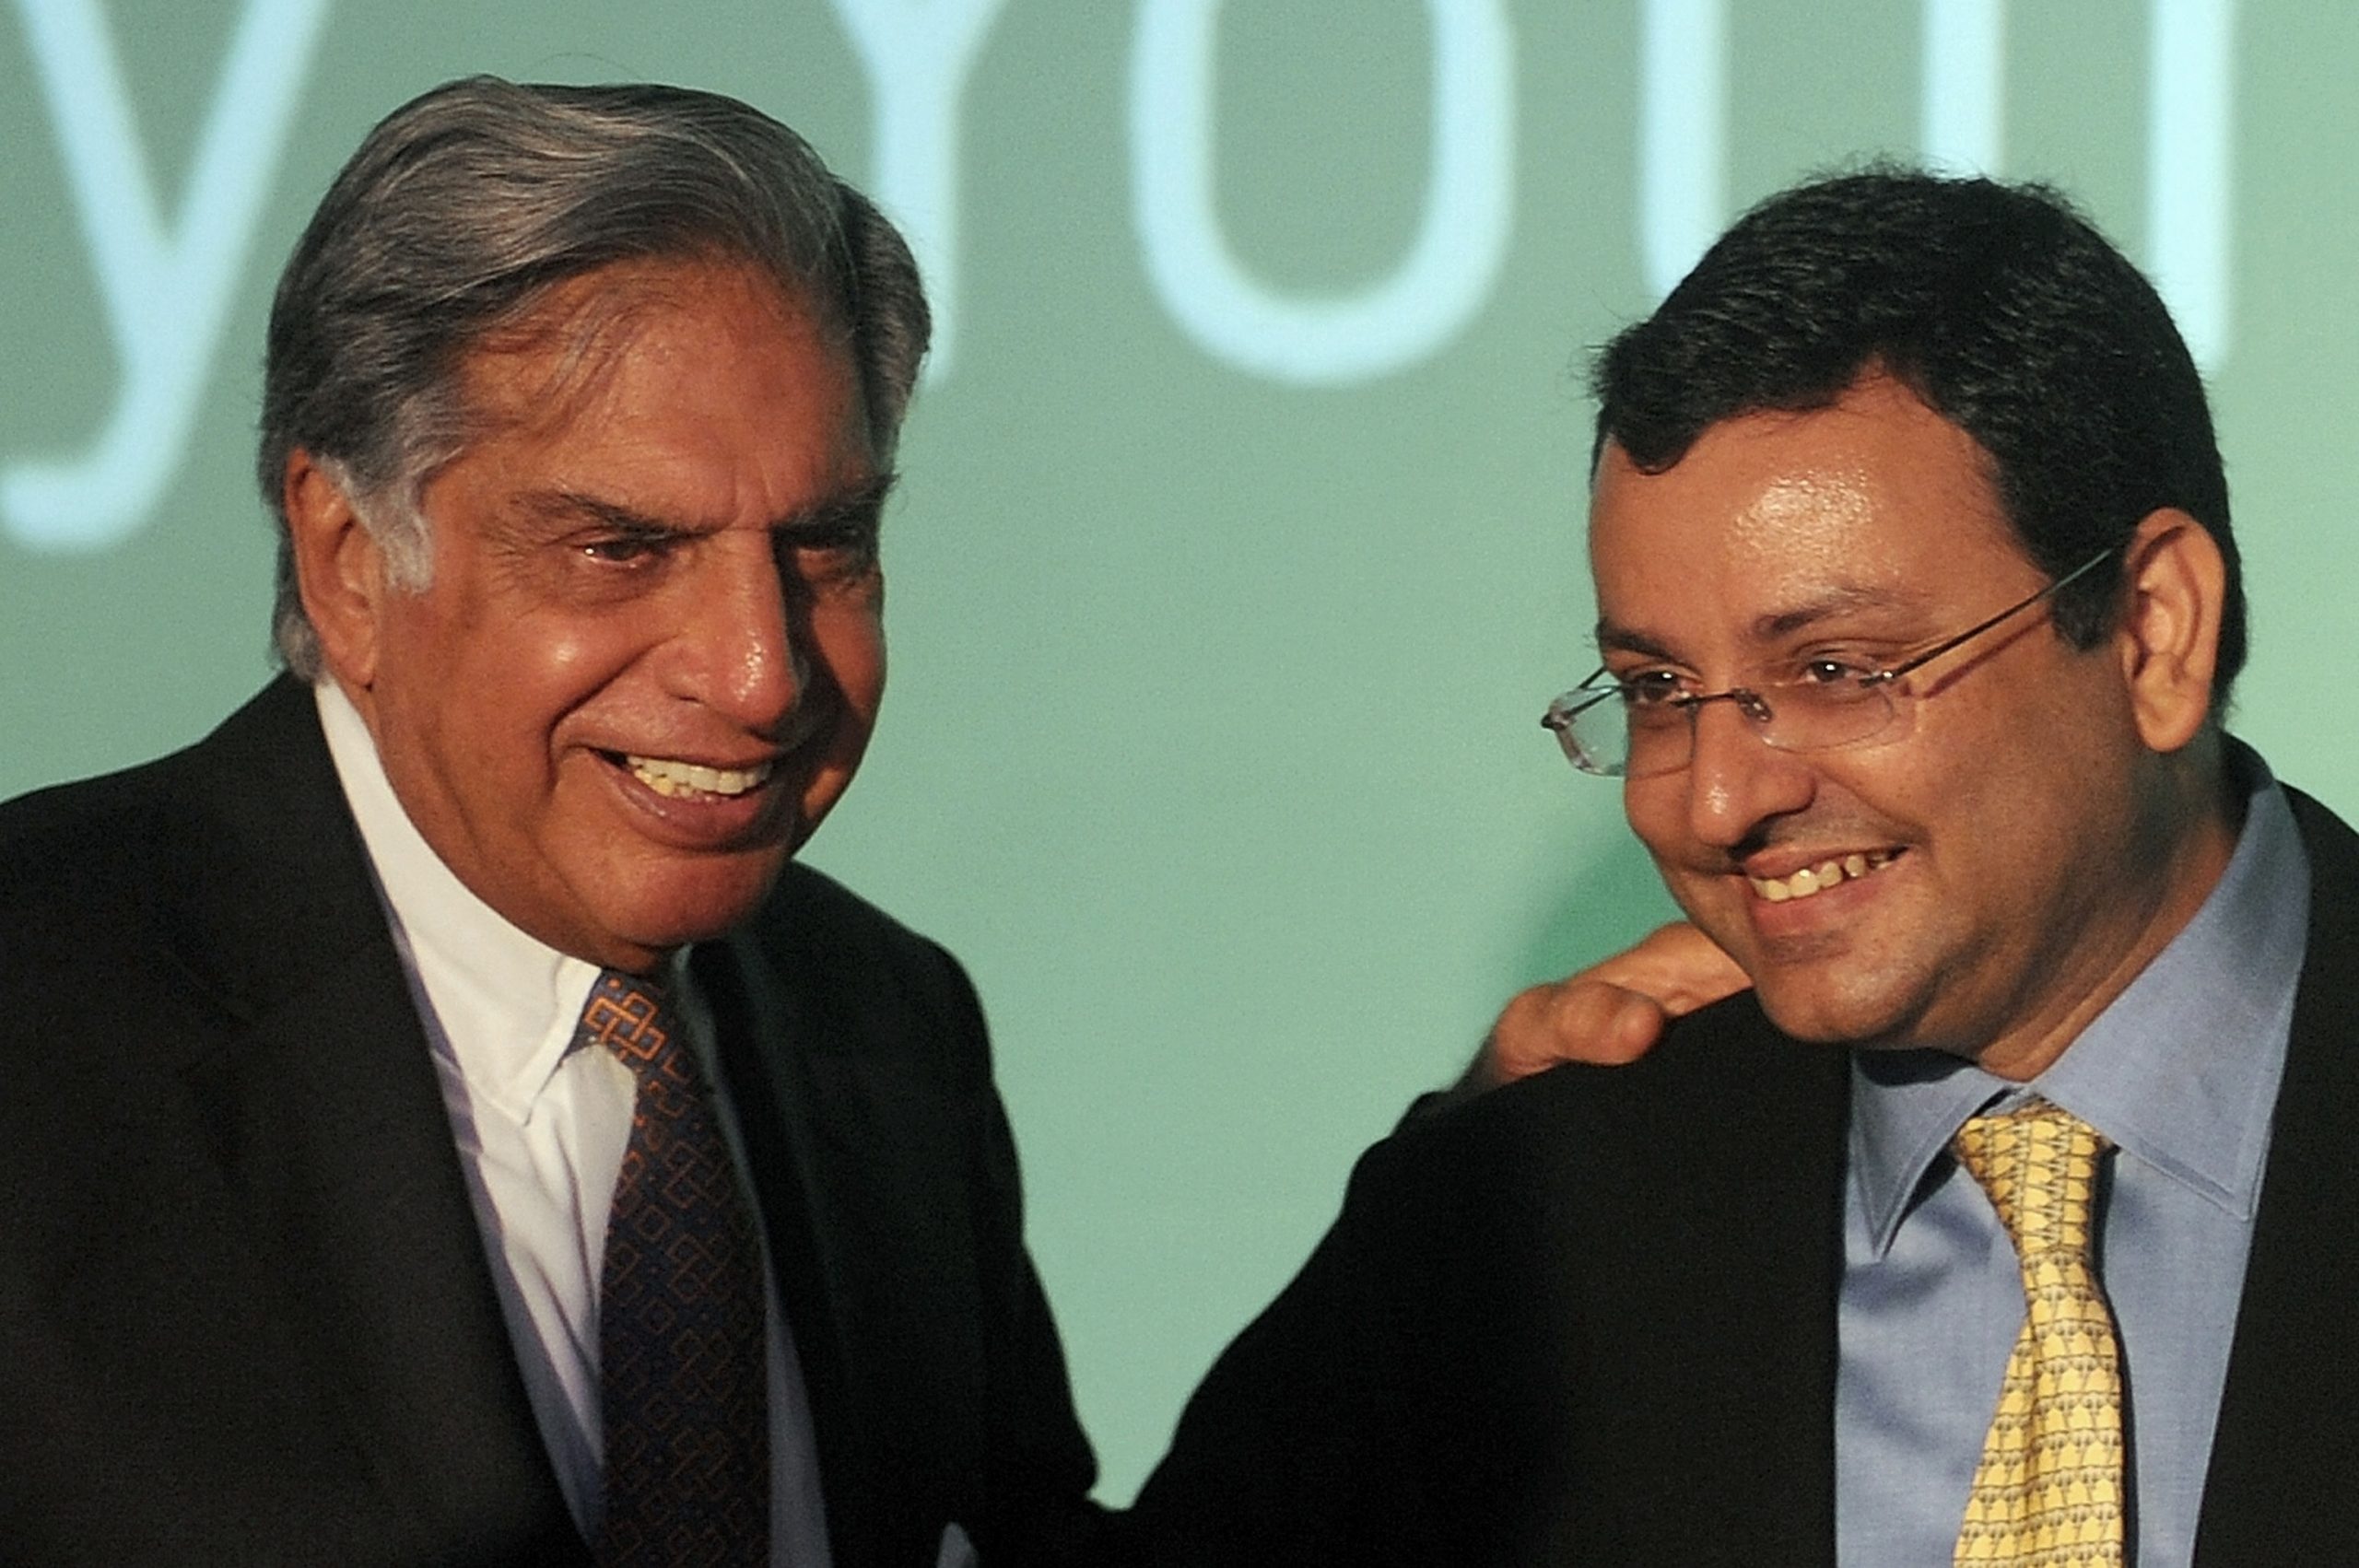 SC rules in favour of Tata Group, says Cyrus Mistry’s removal from chairmanship was right